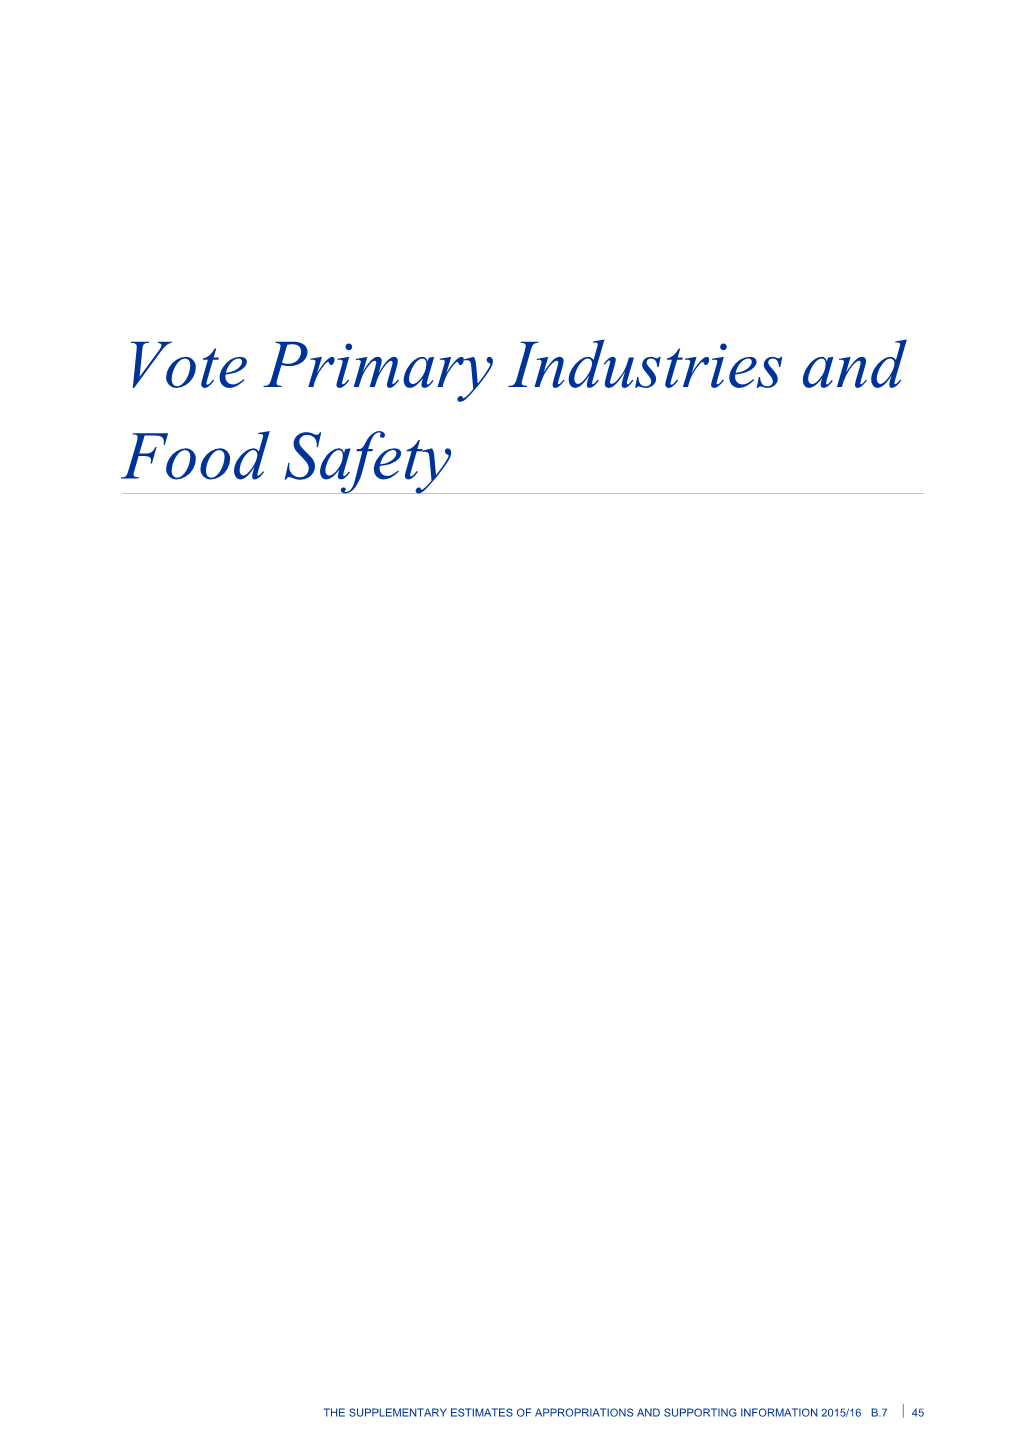 Vote Primary Industries and Food Safety - Supplementary Estimates of Appropriations 2015/16